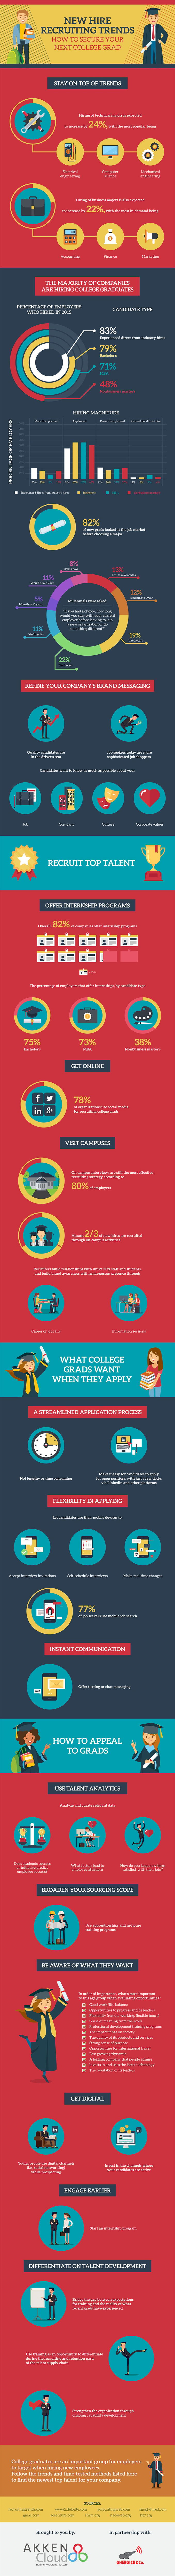 new-hire-recruiting-trends-how-to-secure-your-next-college-grad.png